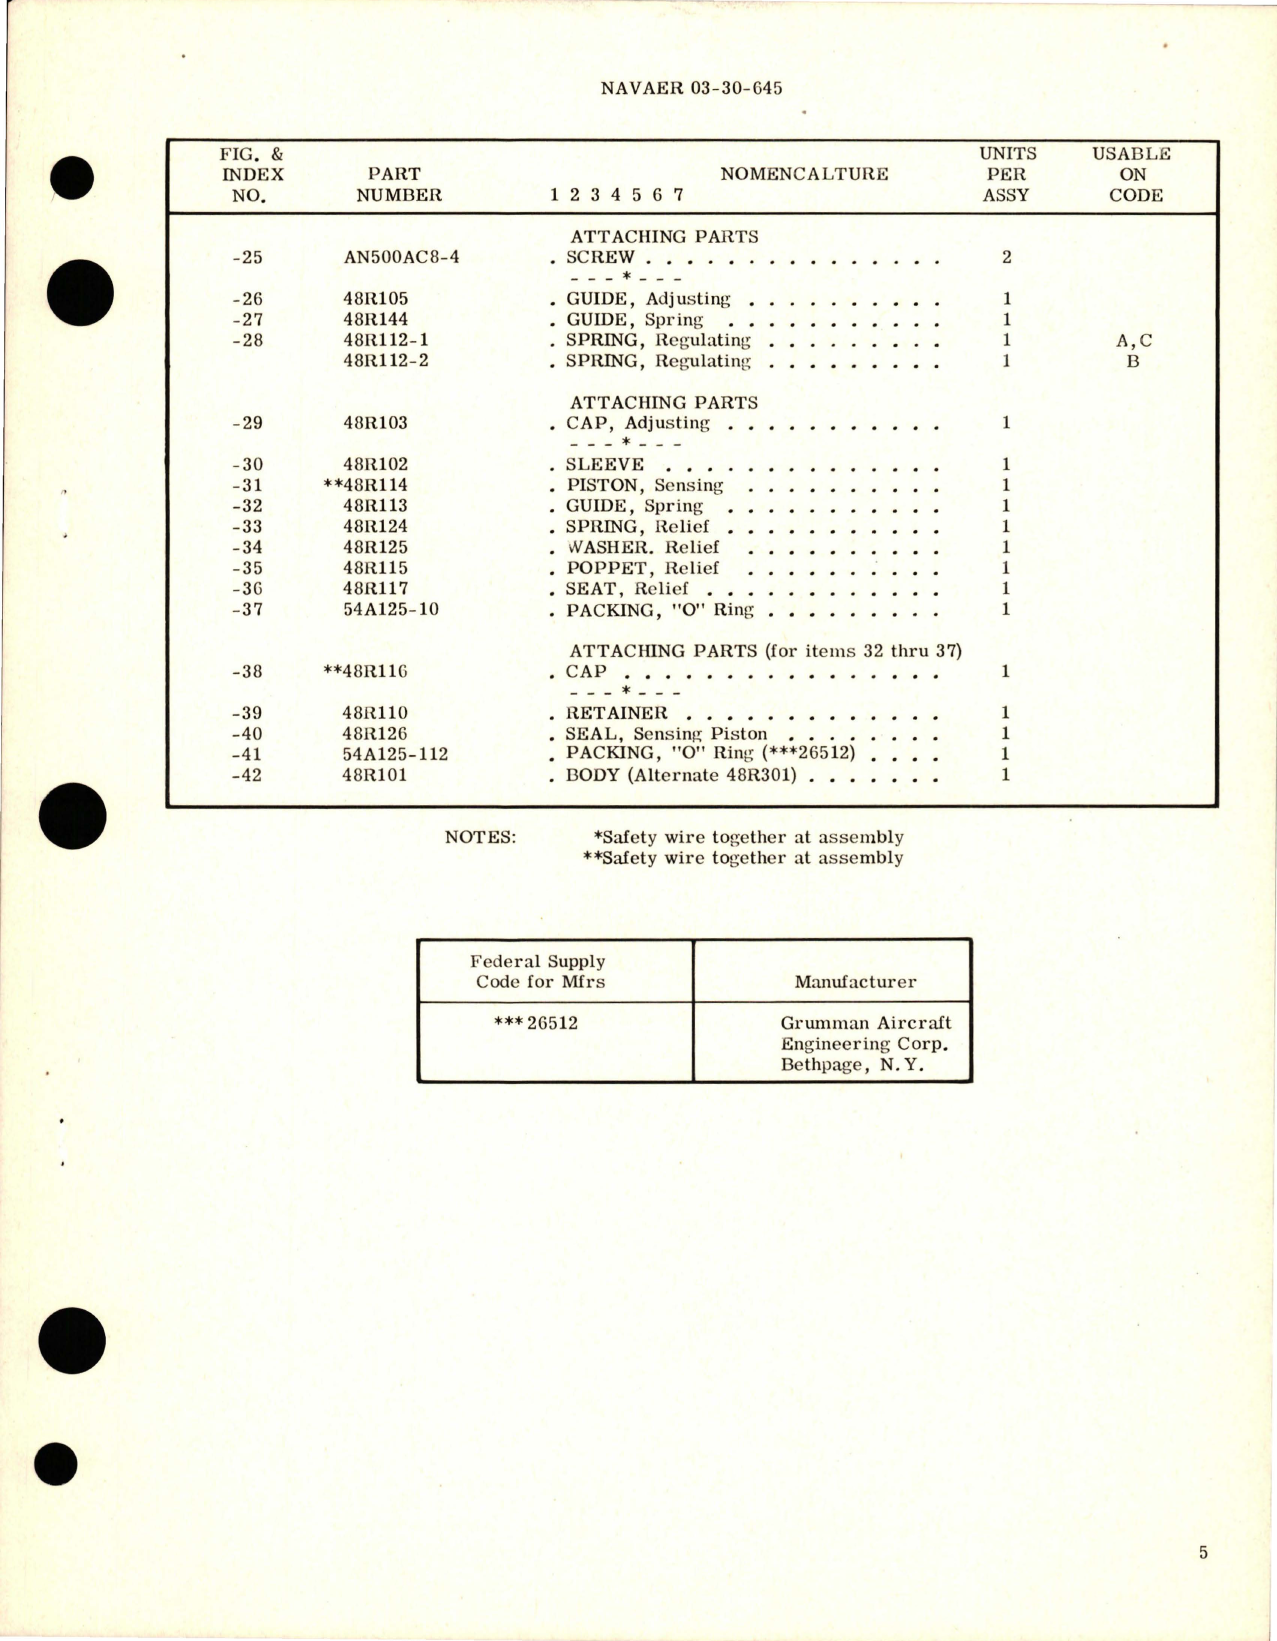 Sample page 5 from AirCorps Library document: Overhaul Instructions with Parts Breakdown for Pneumatic Pressure Reducer Valve - 48R100-1, 48R100-2, and 48R100-3